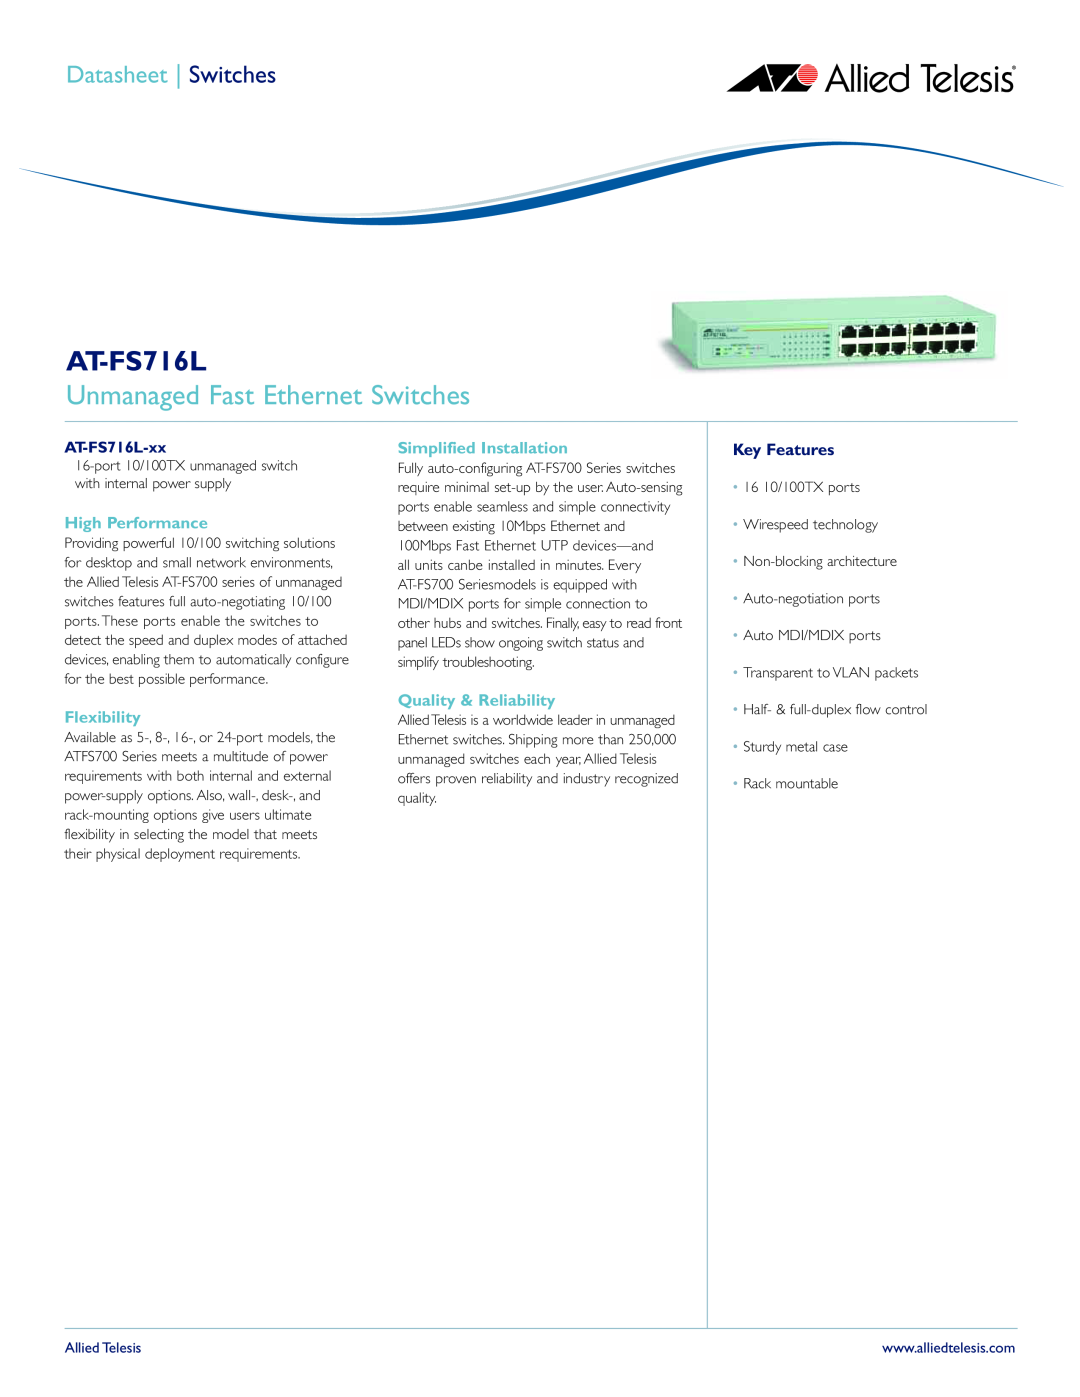 Allied Telesis AT-FS716L manual Unmanaged Fast Ethernet Switches, High Performance, Flexibility, Simplified Installation 